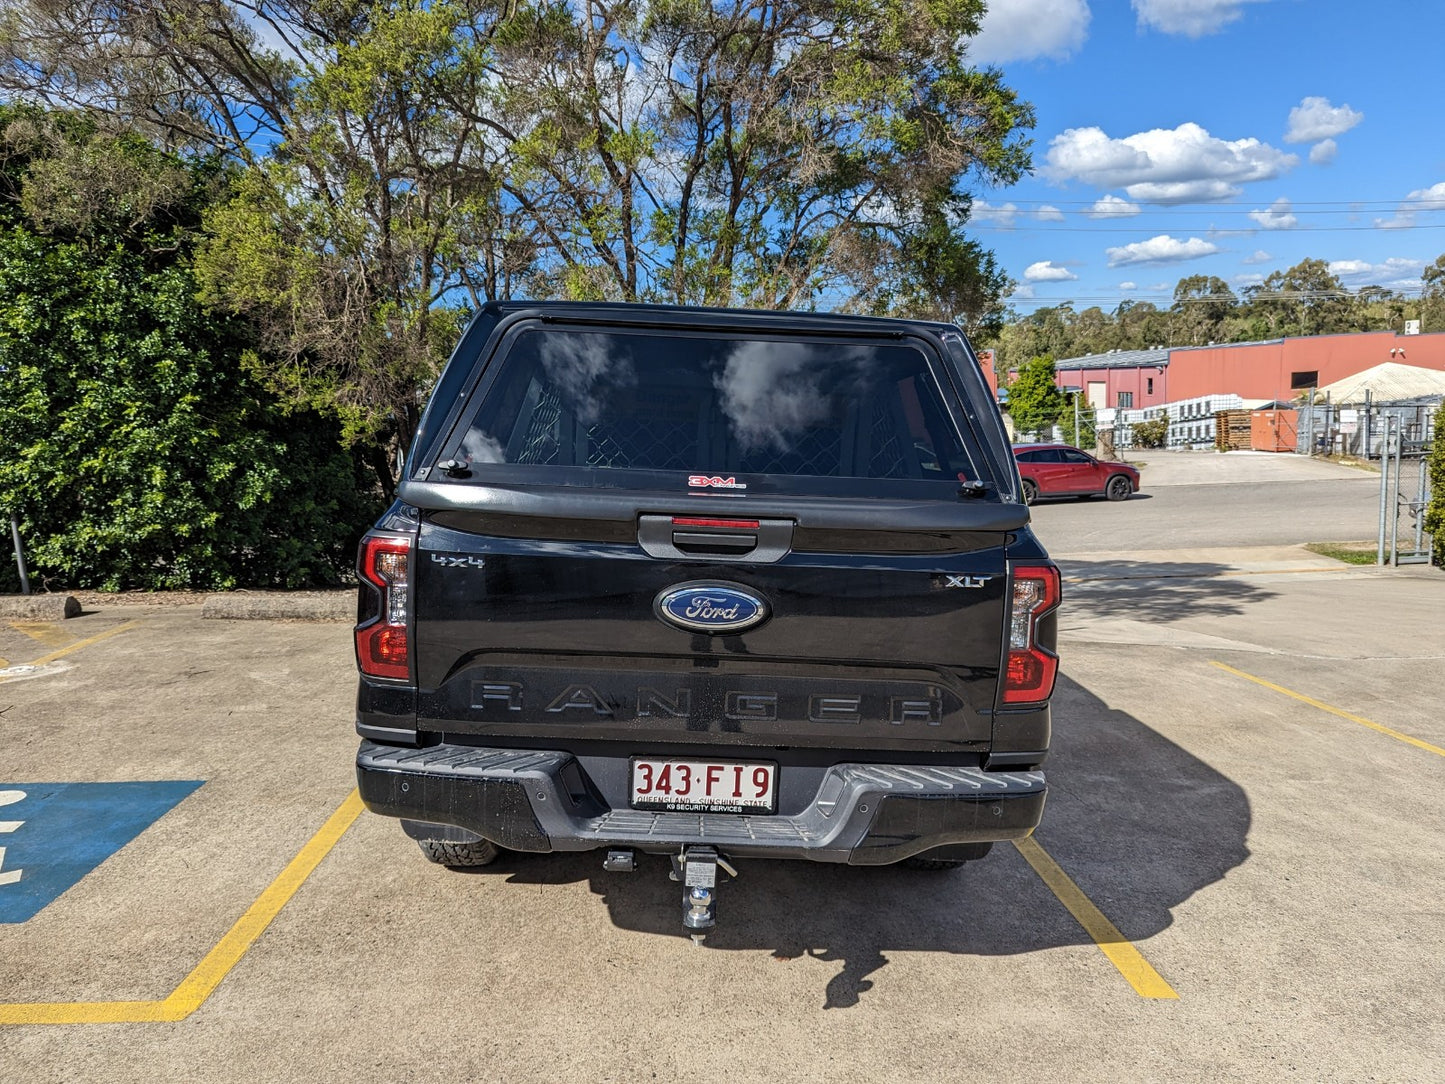 3XM DELUXE SMOOTH CANOPY TO SUIT FORD RANGER NEXT GEN DUAL CAB 2022+